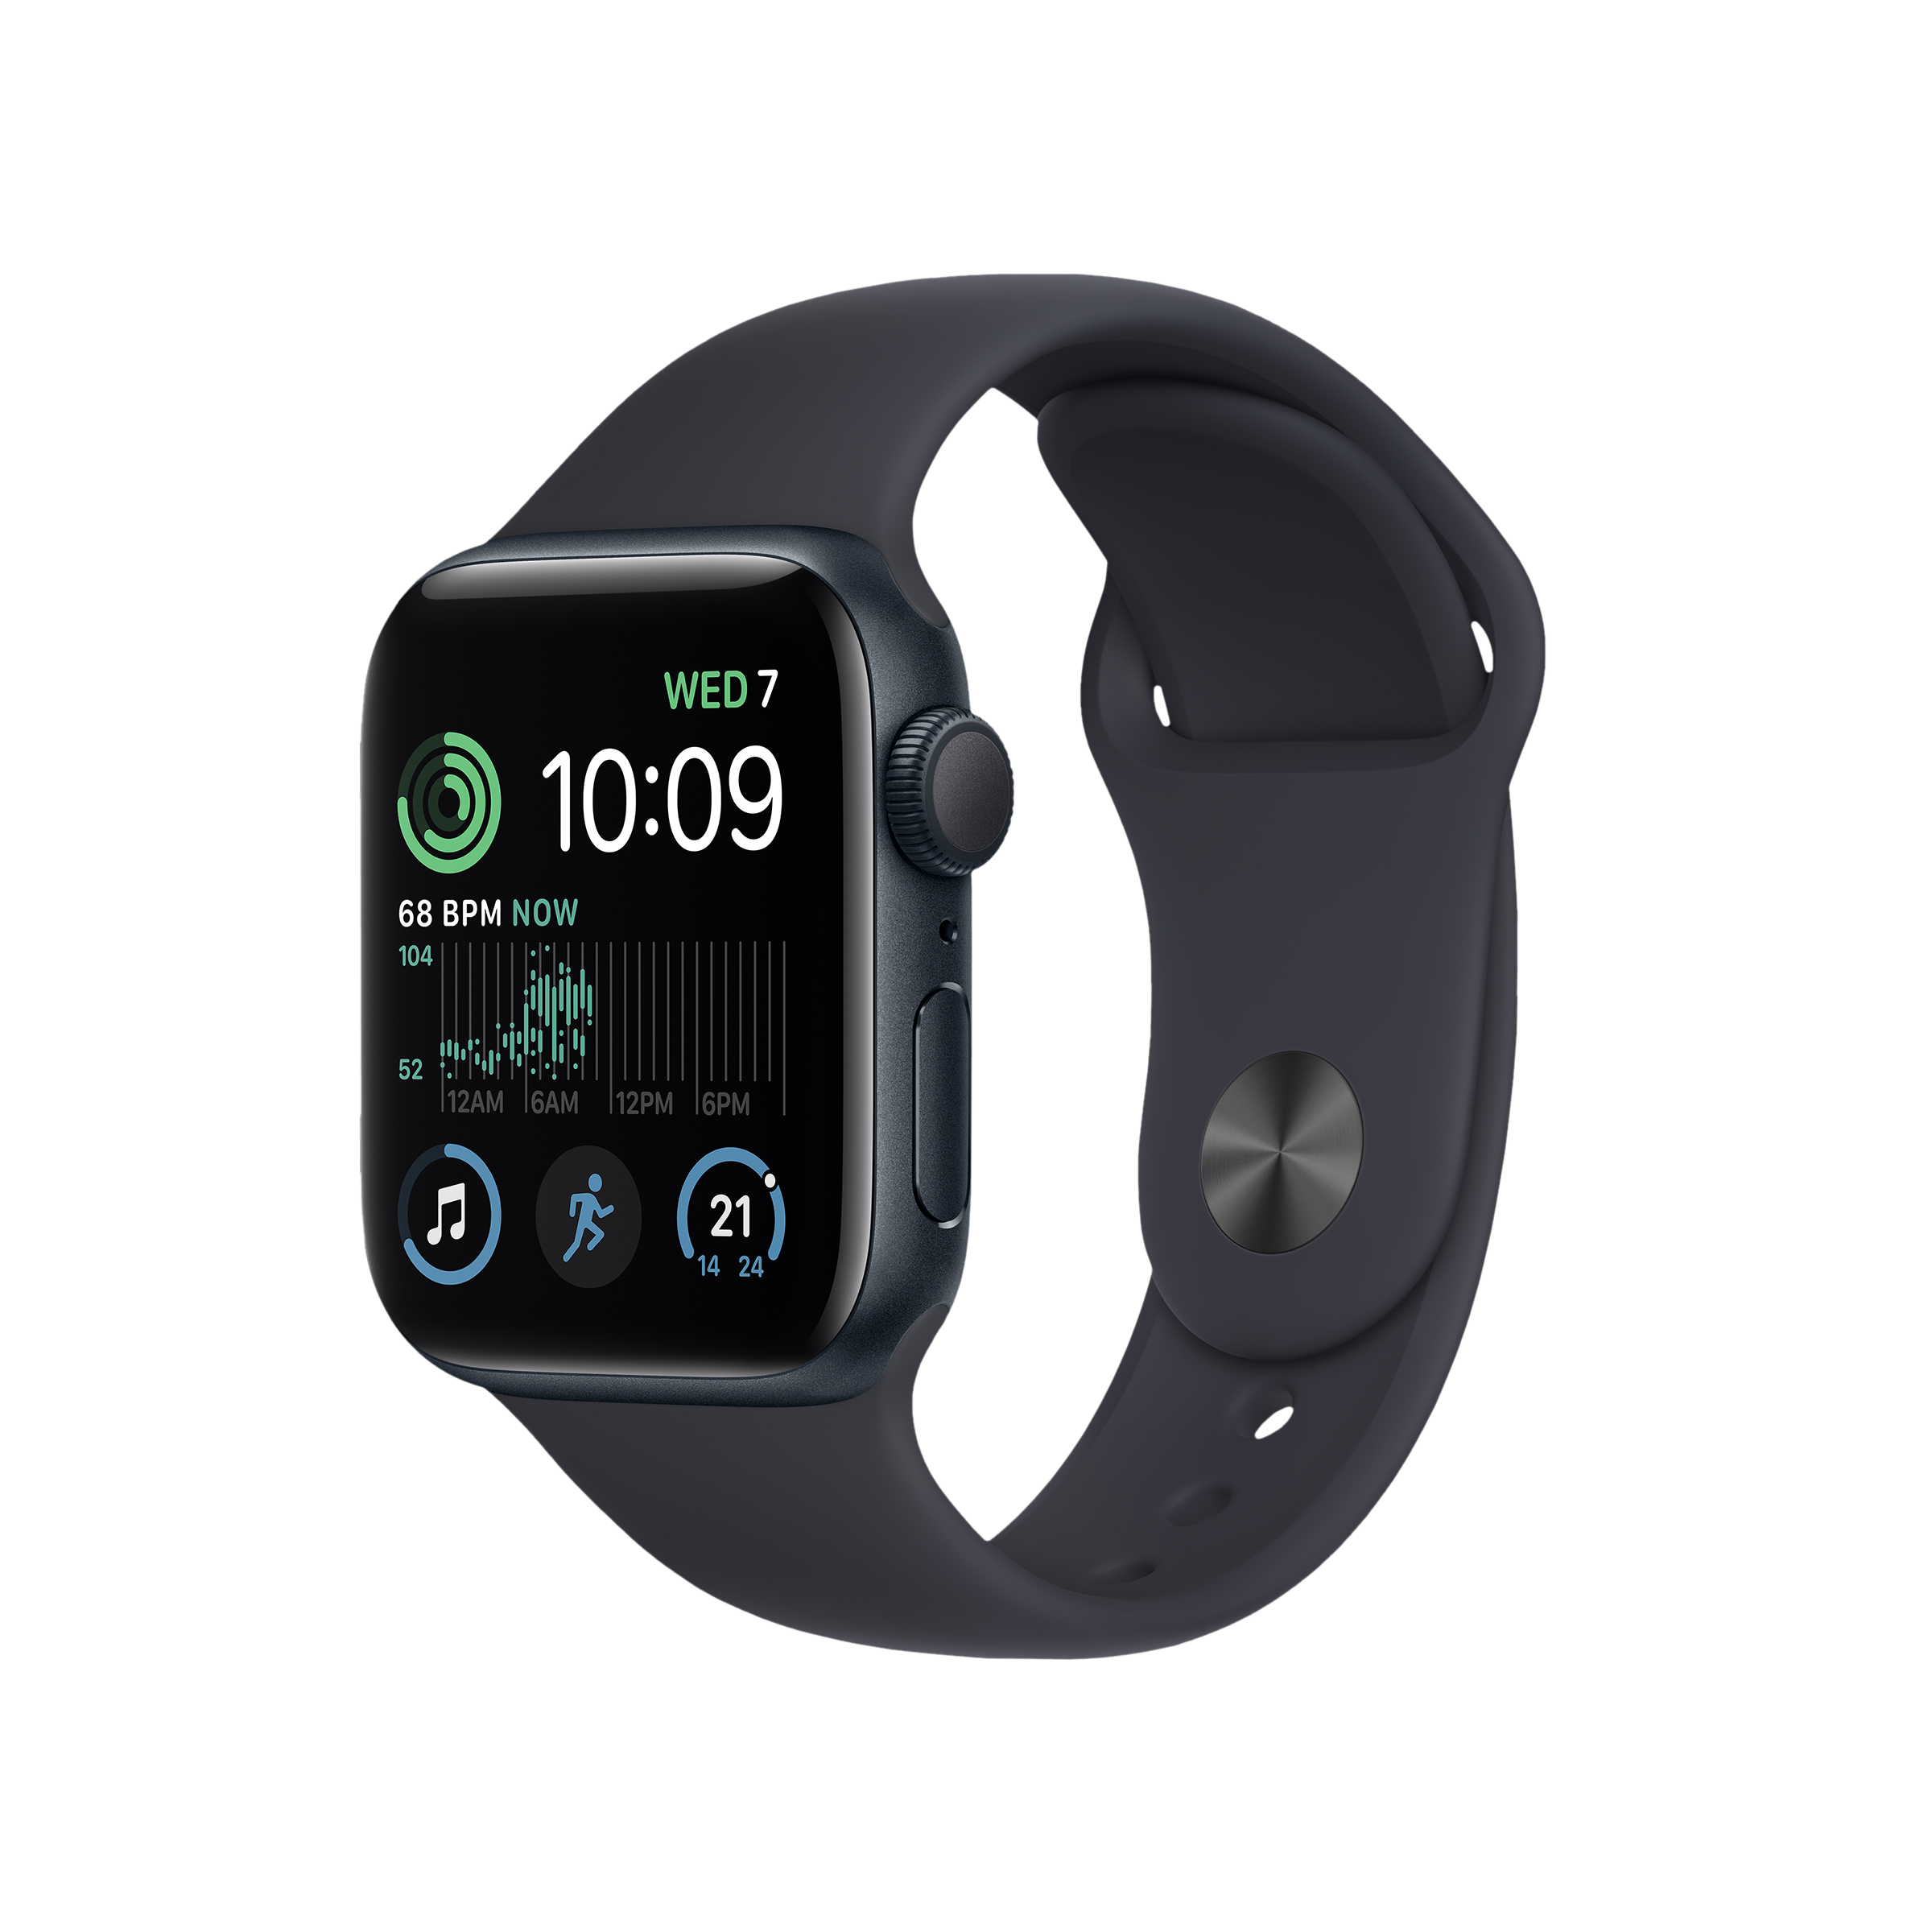 Apple Watch double tap gesture now available with watchOS 10.1 - Apple-nextbuild.com.vn